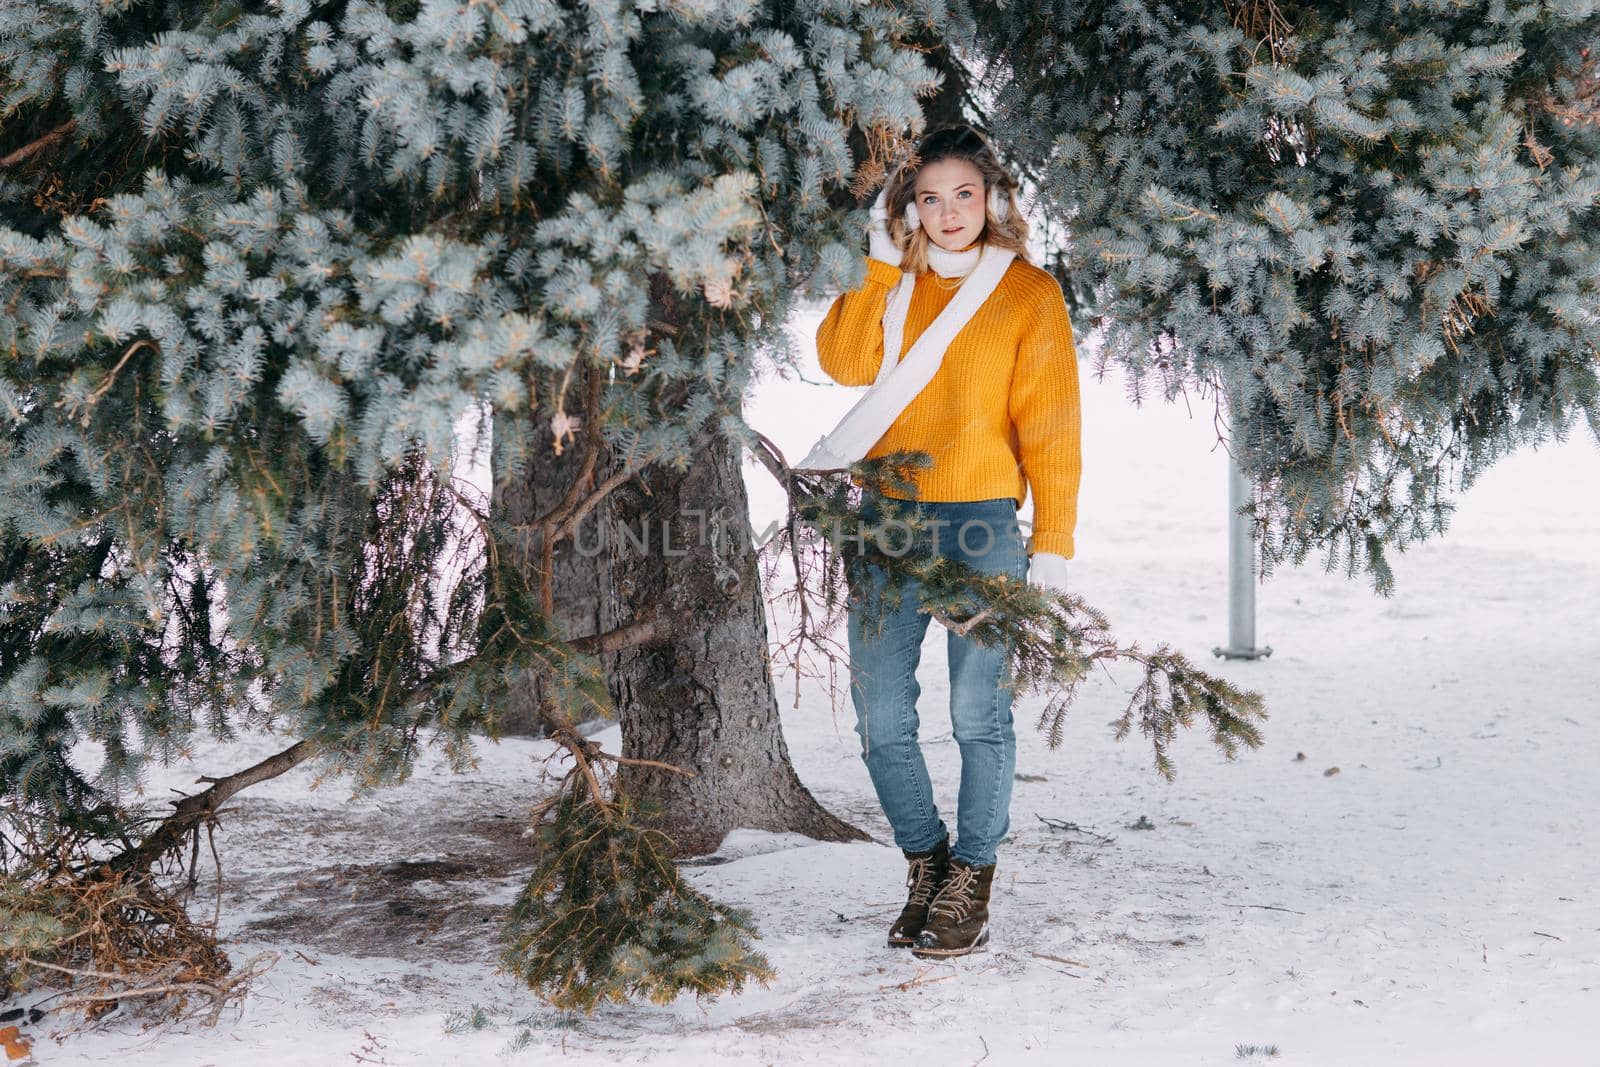 Teen blonde in a yellow sweater outside in winter. A teenage girl on a walk in winter clothes in a snowy forest.